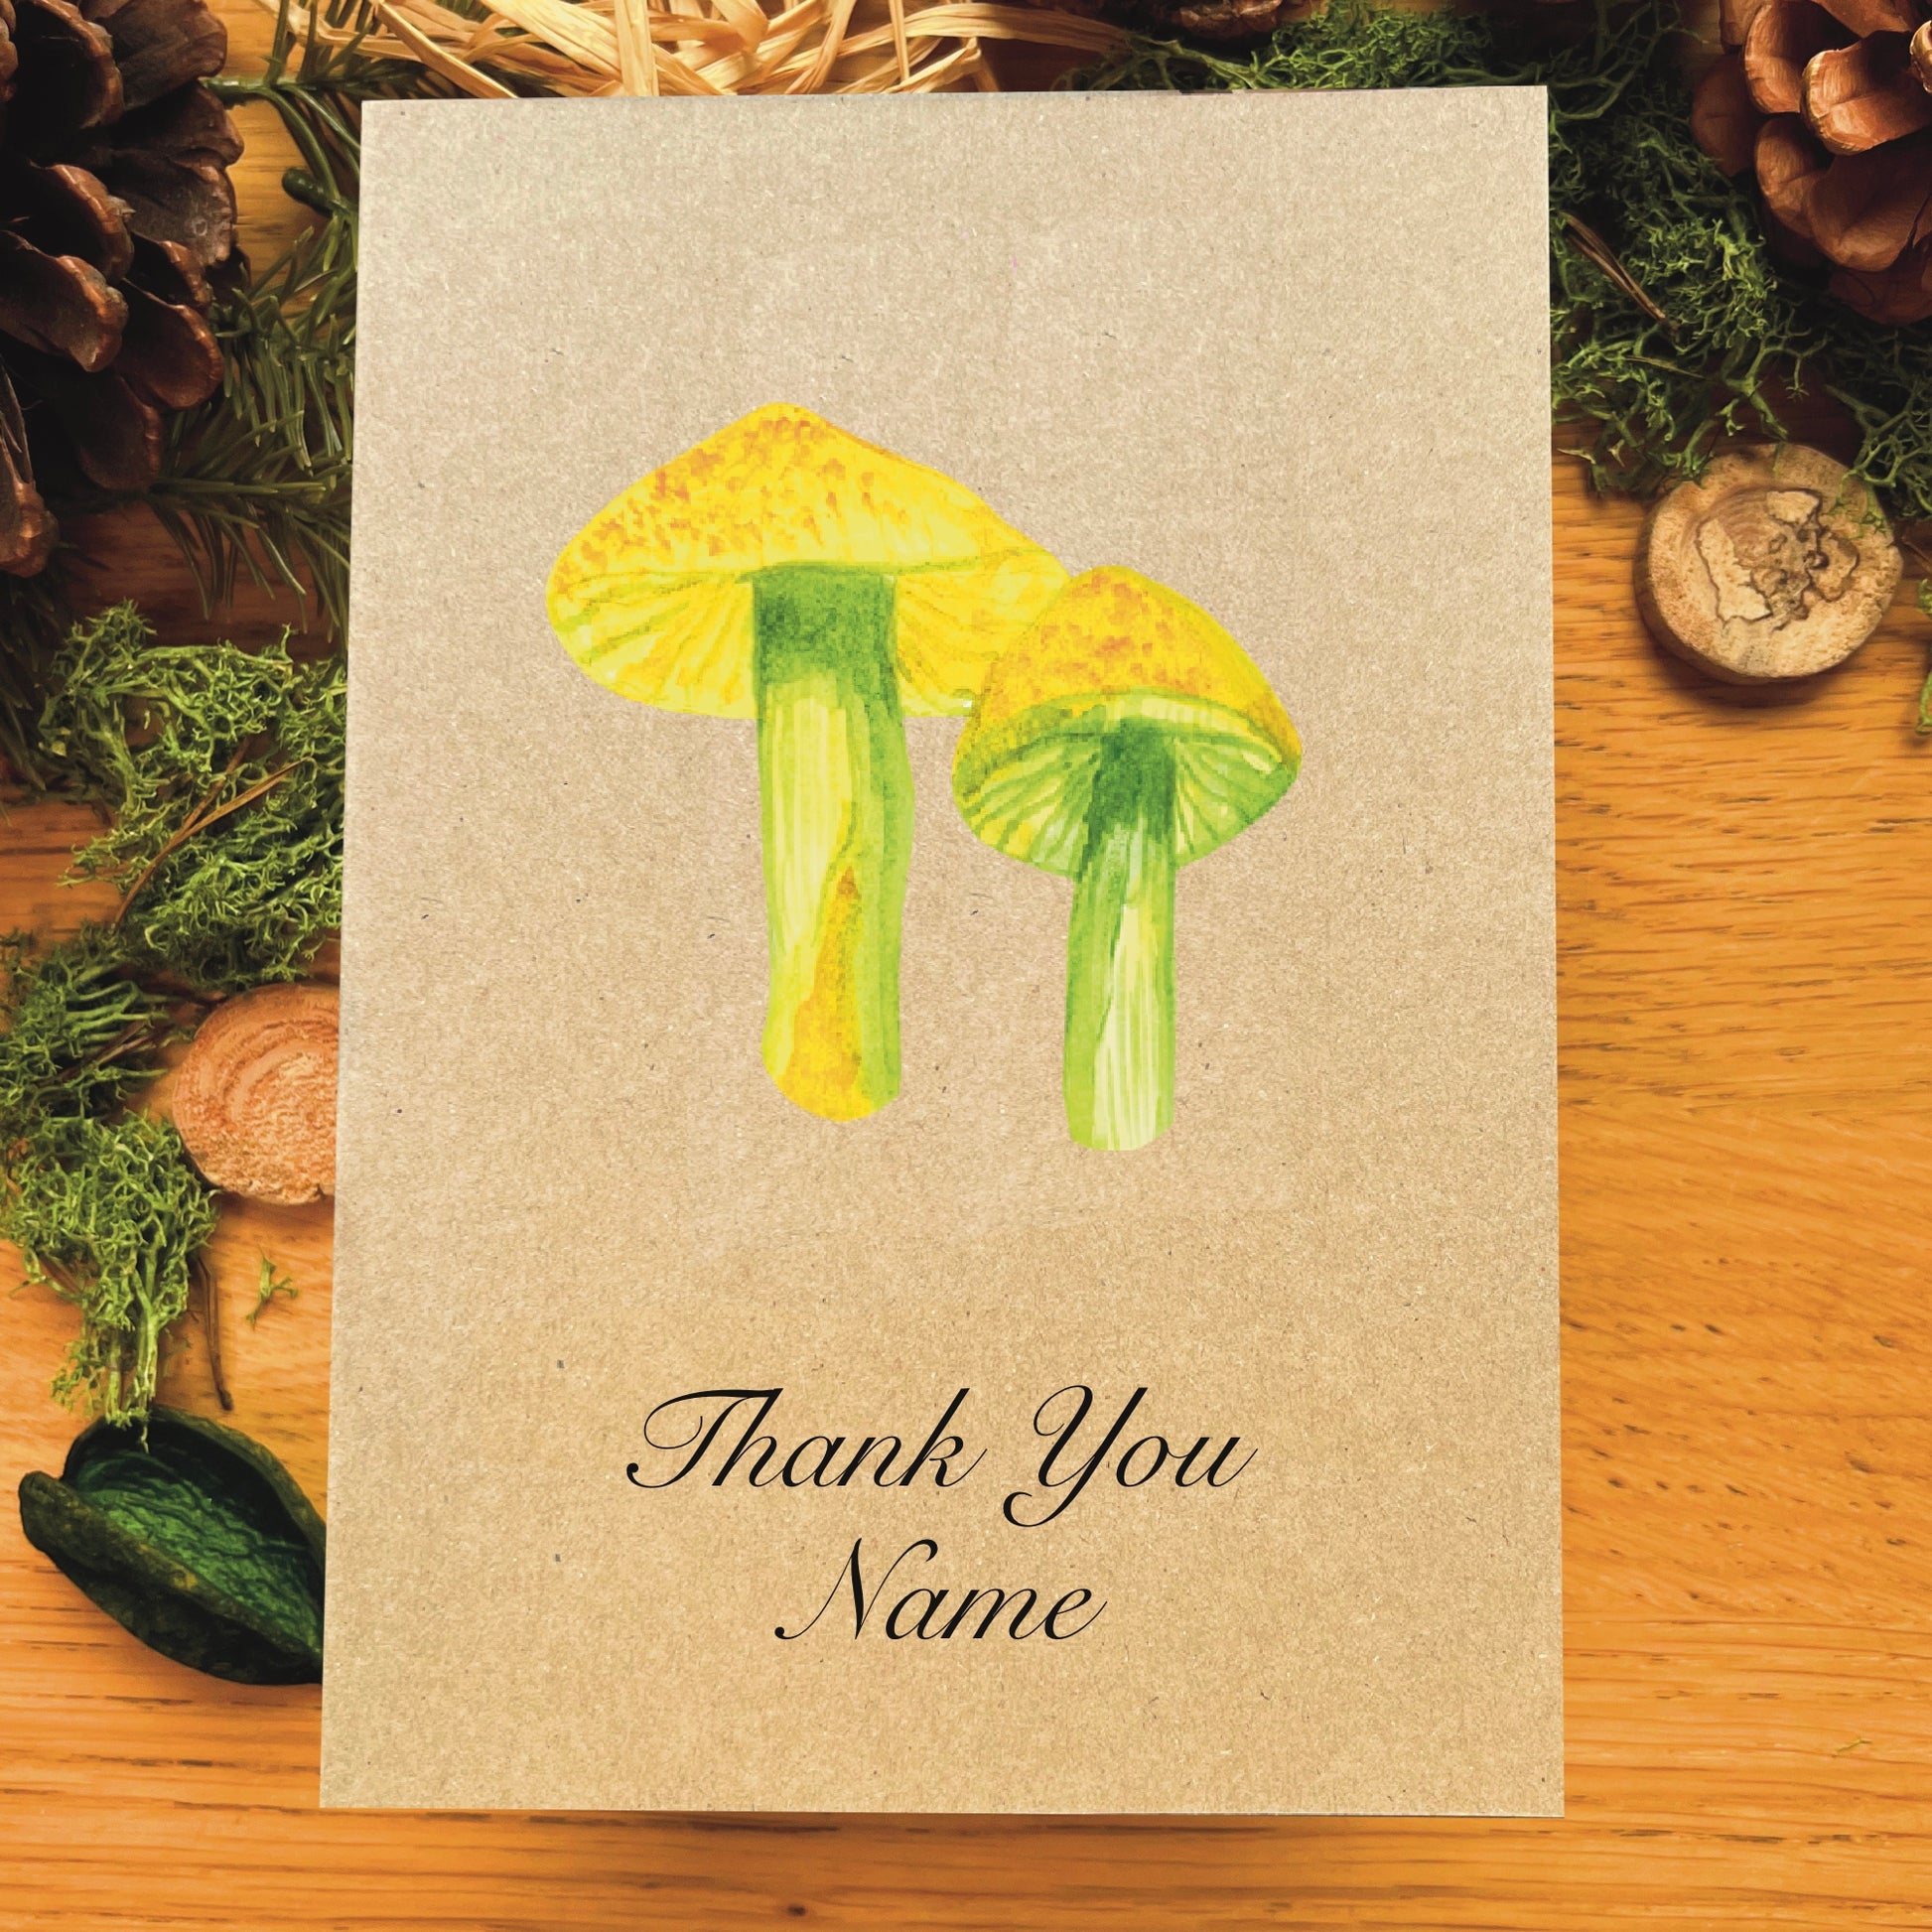 Parrot waxcap illustrated in watercolour attached to Manila recycled greetings card on a wooden desk, with text script Thank You Name underneath the illustration